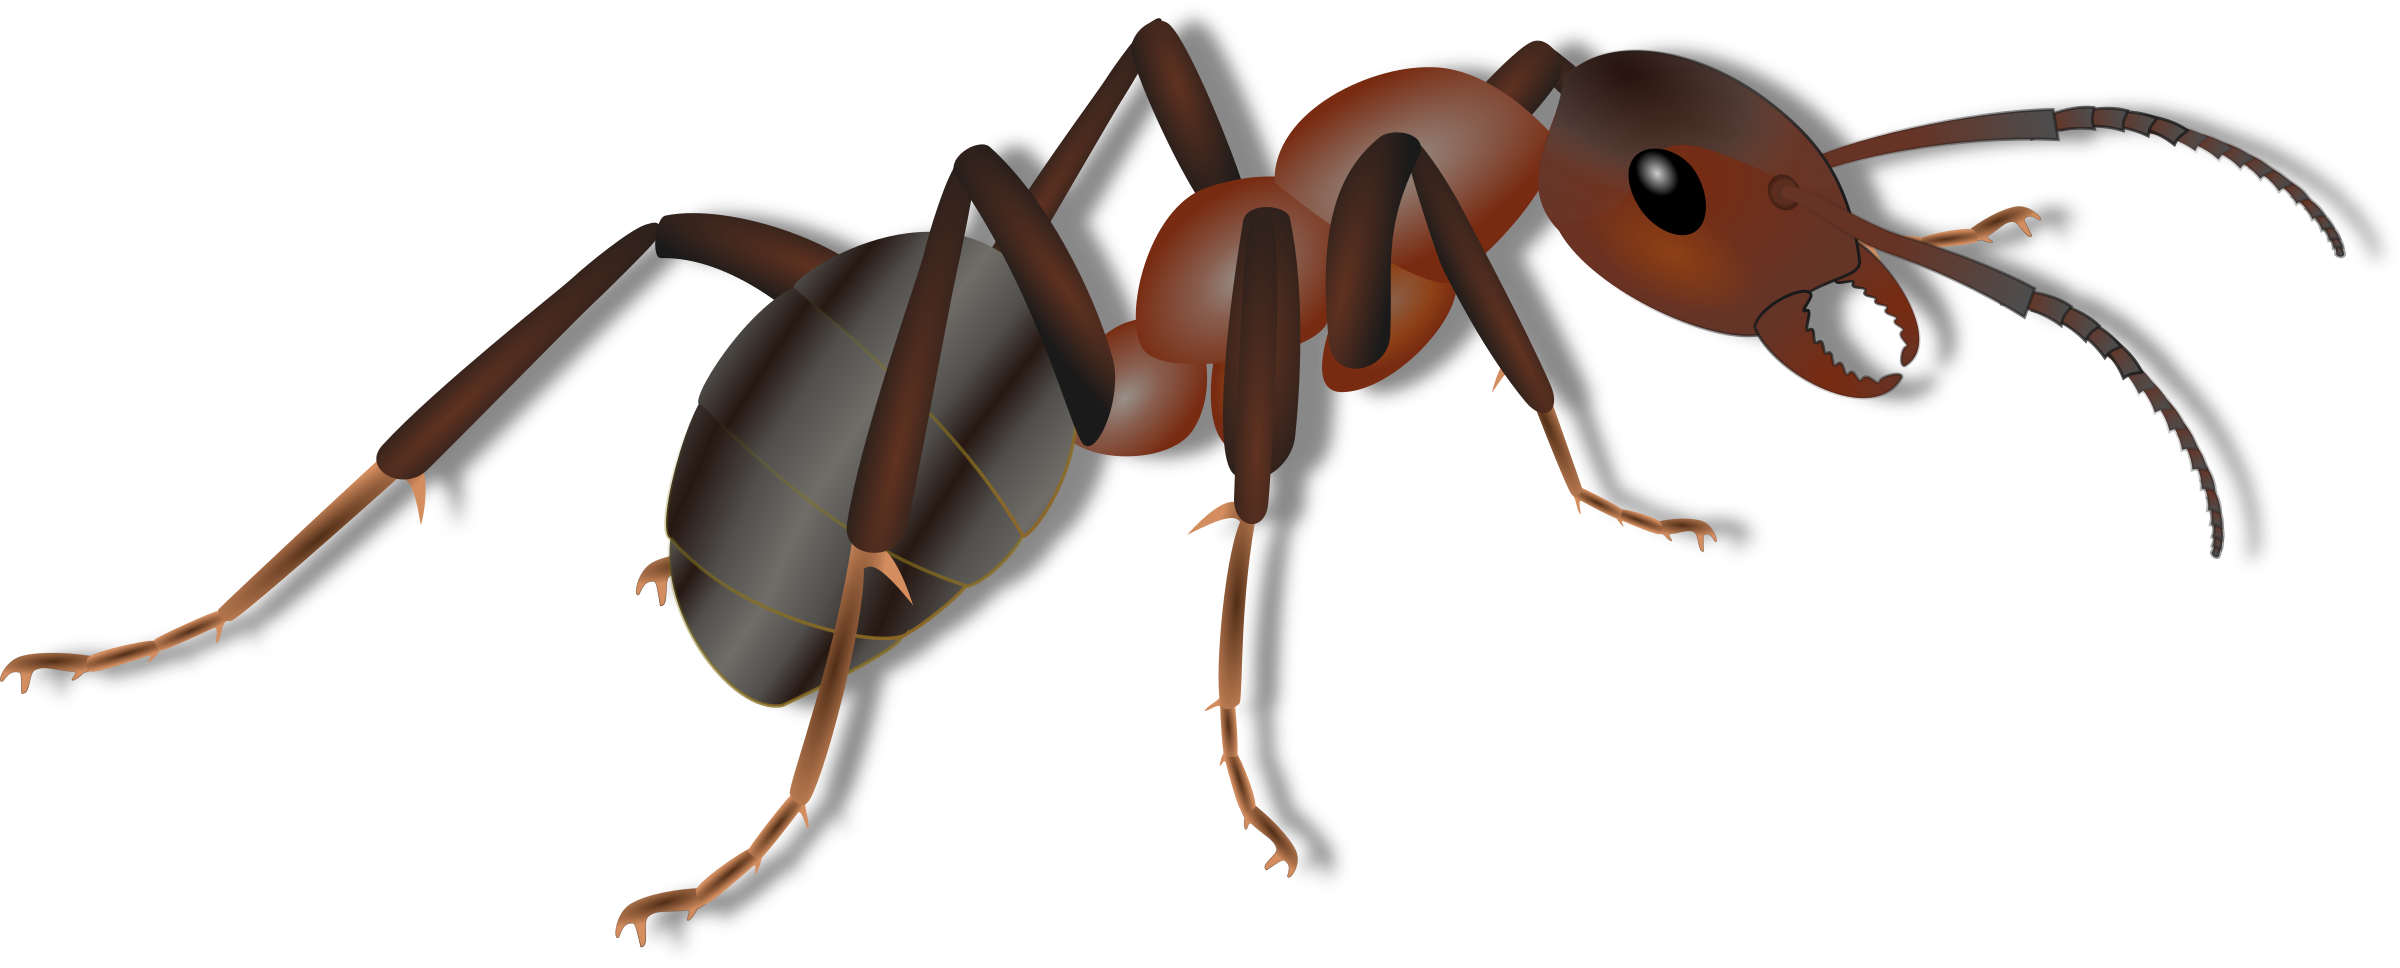 Ant PNG Photos